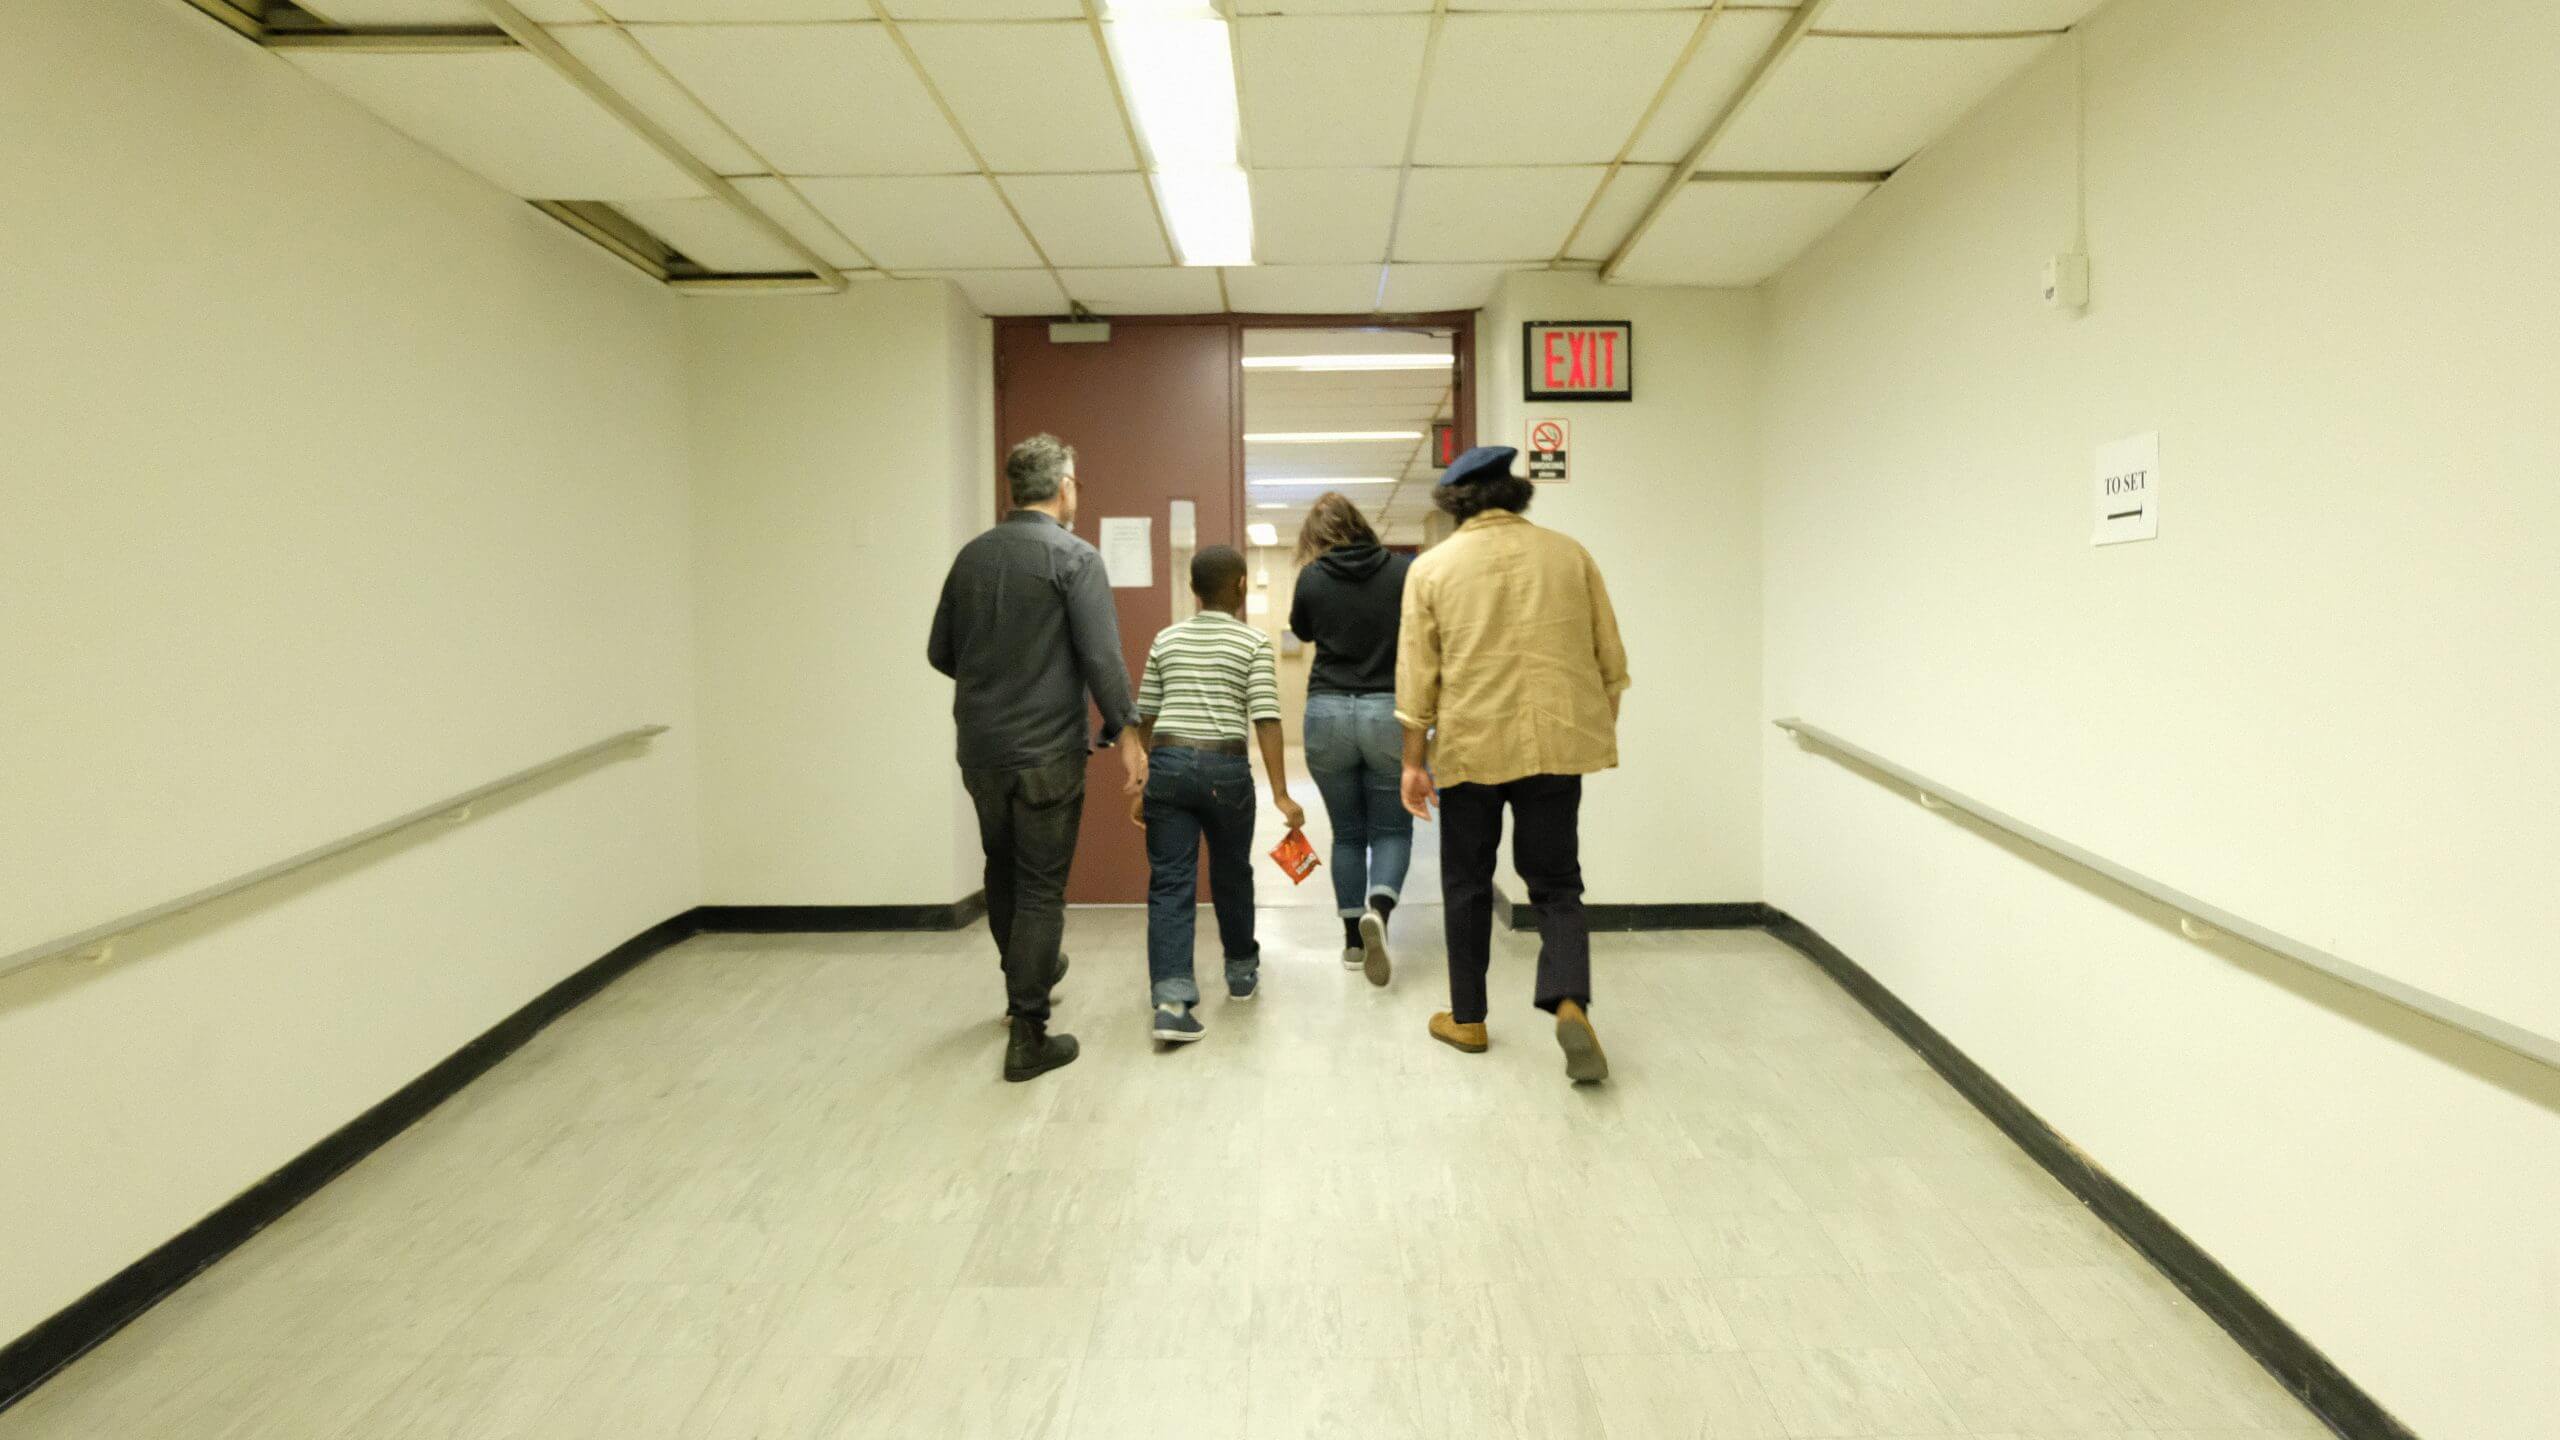 Producer Toby Gerber, Director Emma Francis-Snyder, and two actors walking in a hallway